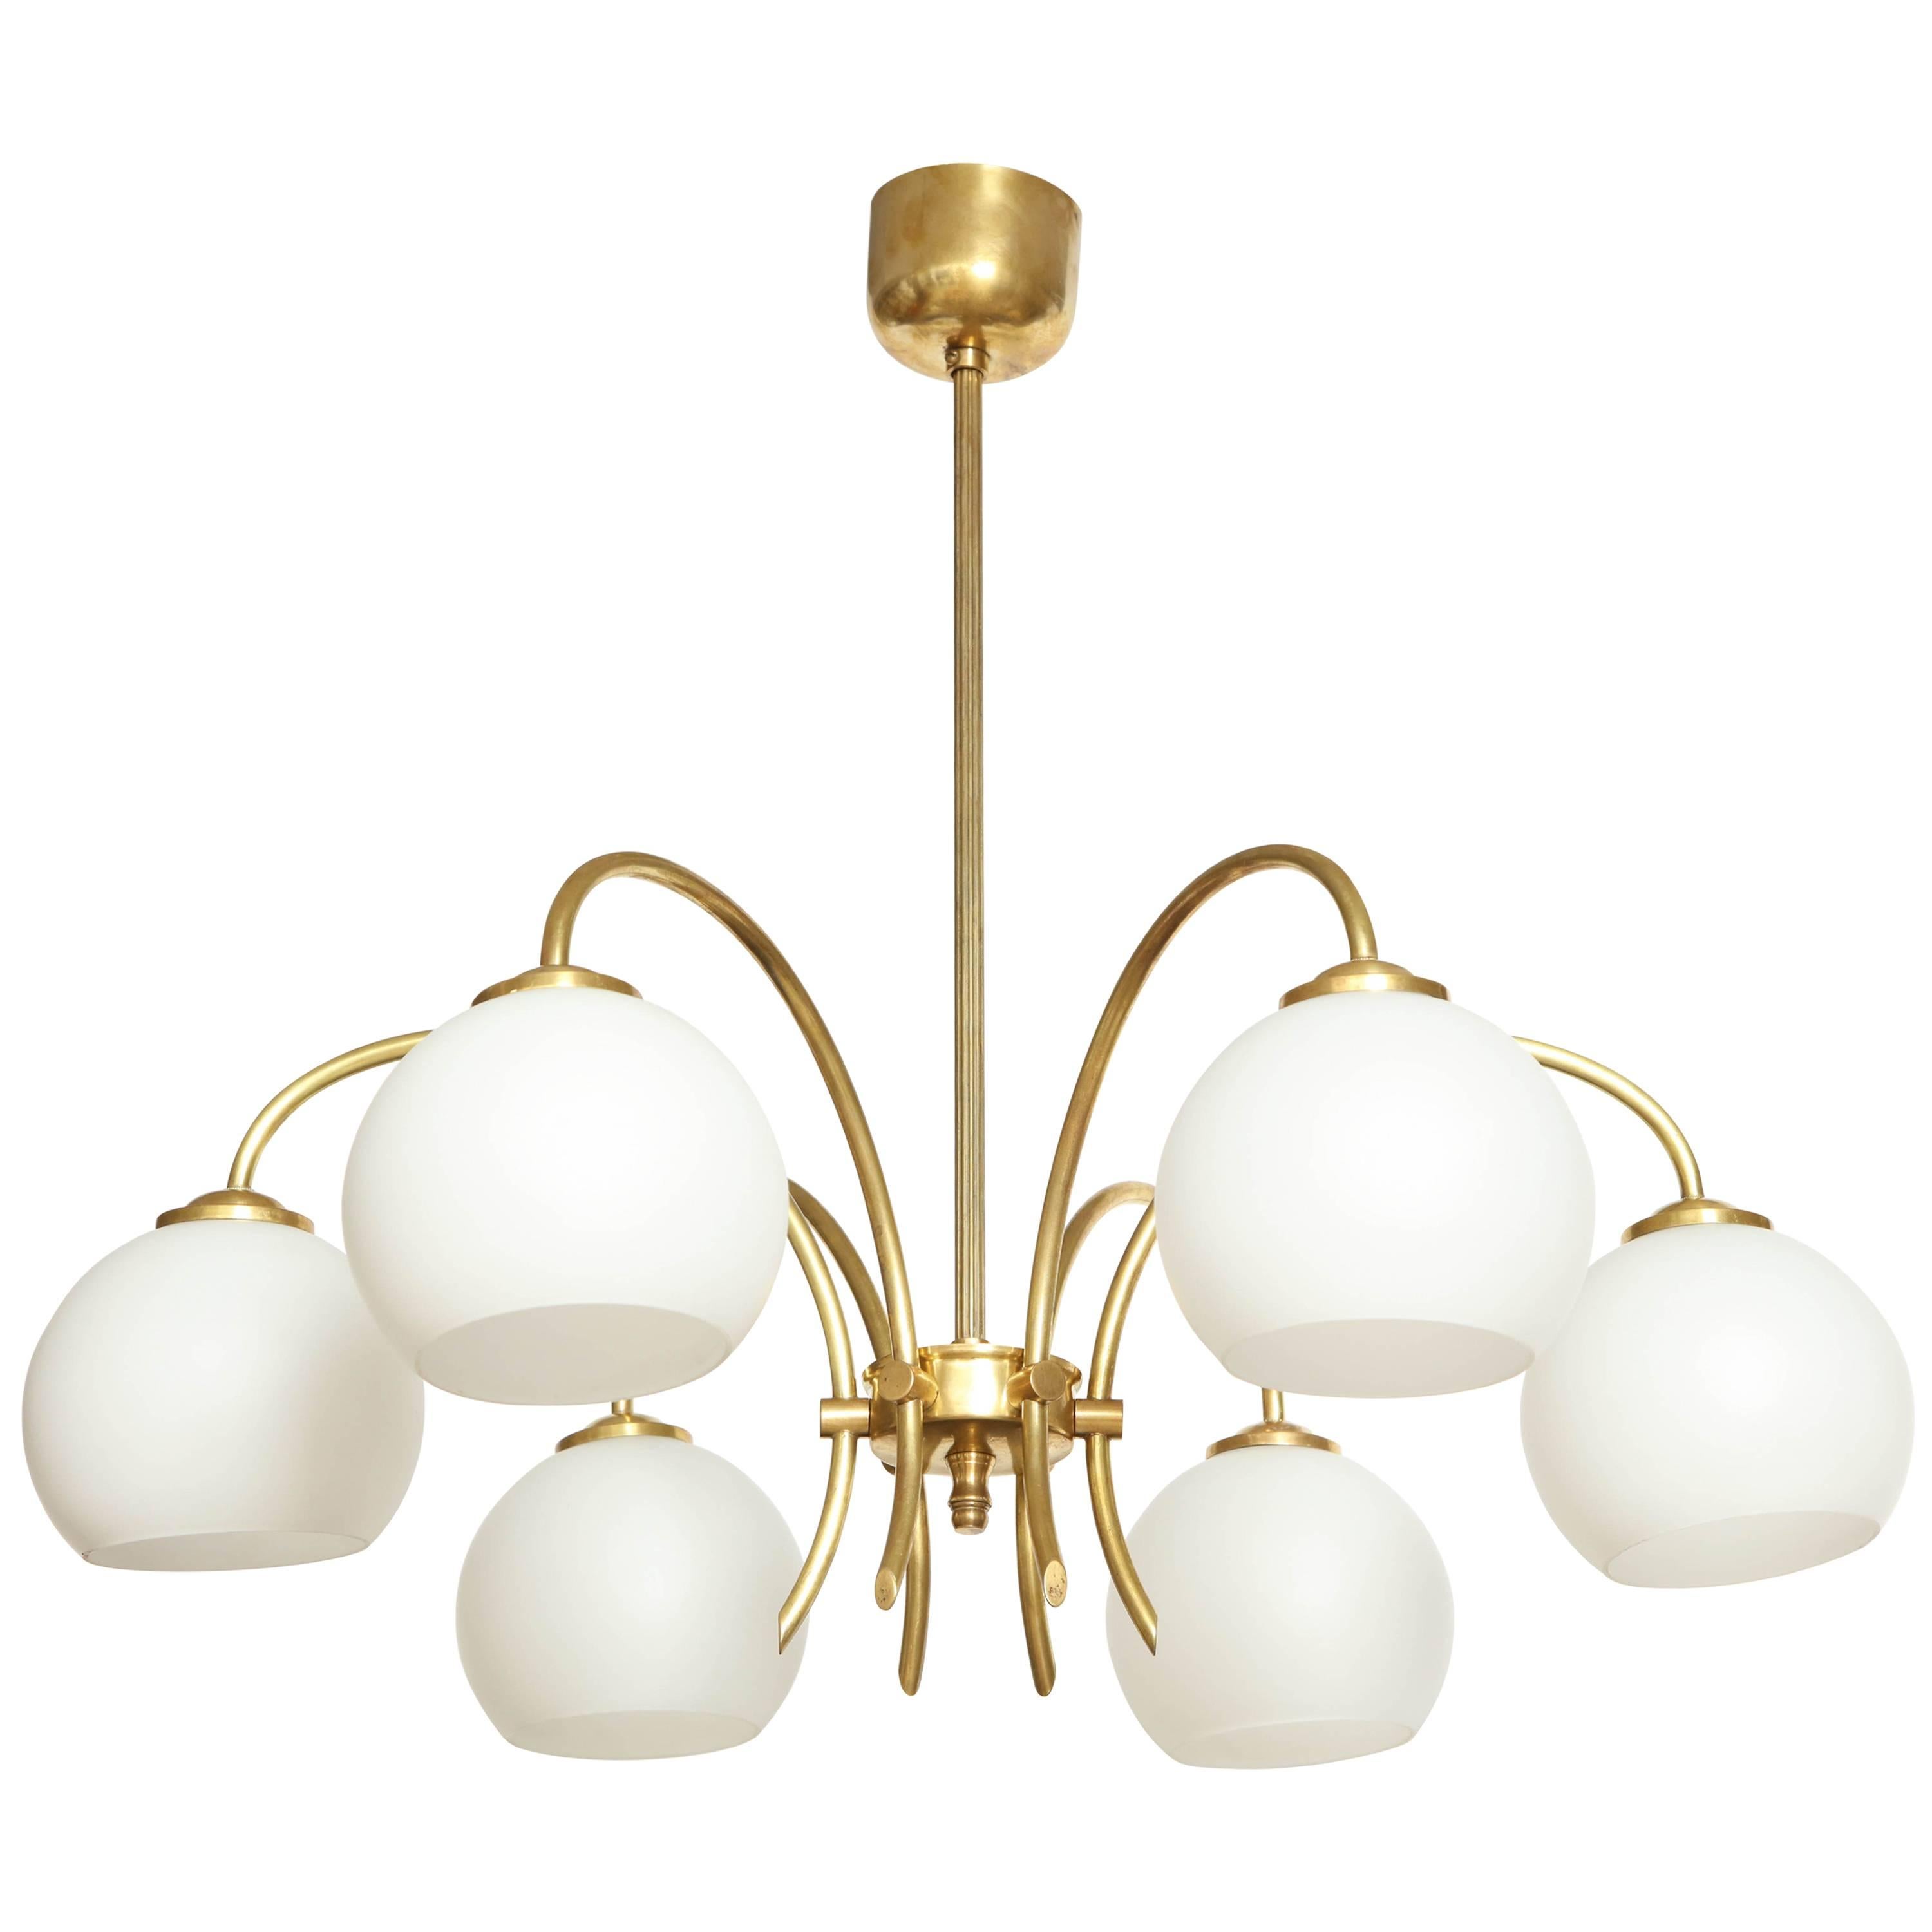 Danish Six Arched Arm Brass and Milk Glass Chandelier, circa 1960s